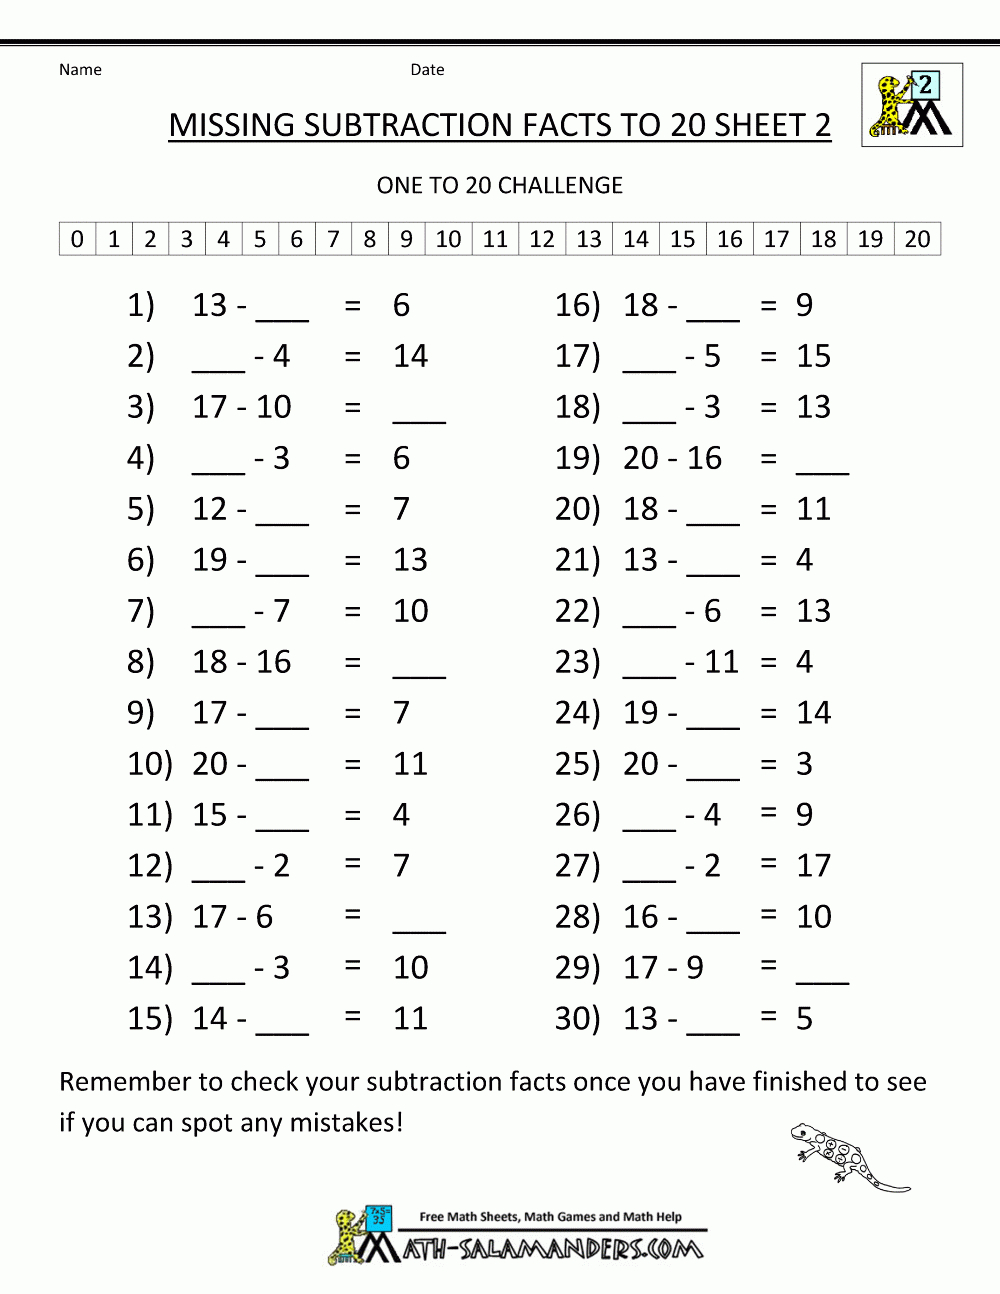 Math Worksheets For 2Nd Grade Missing Subtraction Facts To 20 2 - Free Math Printables For 2Nd Grade